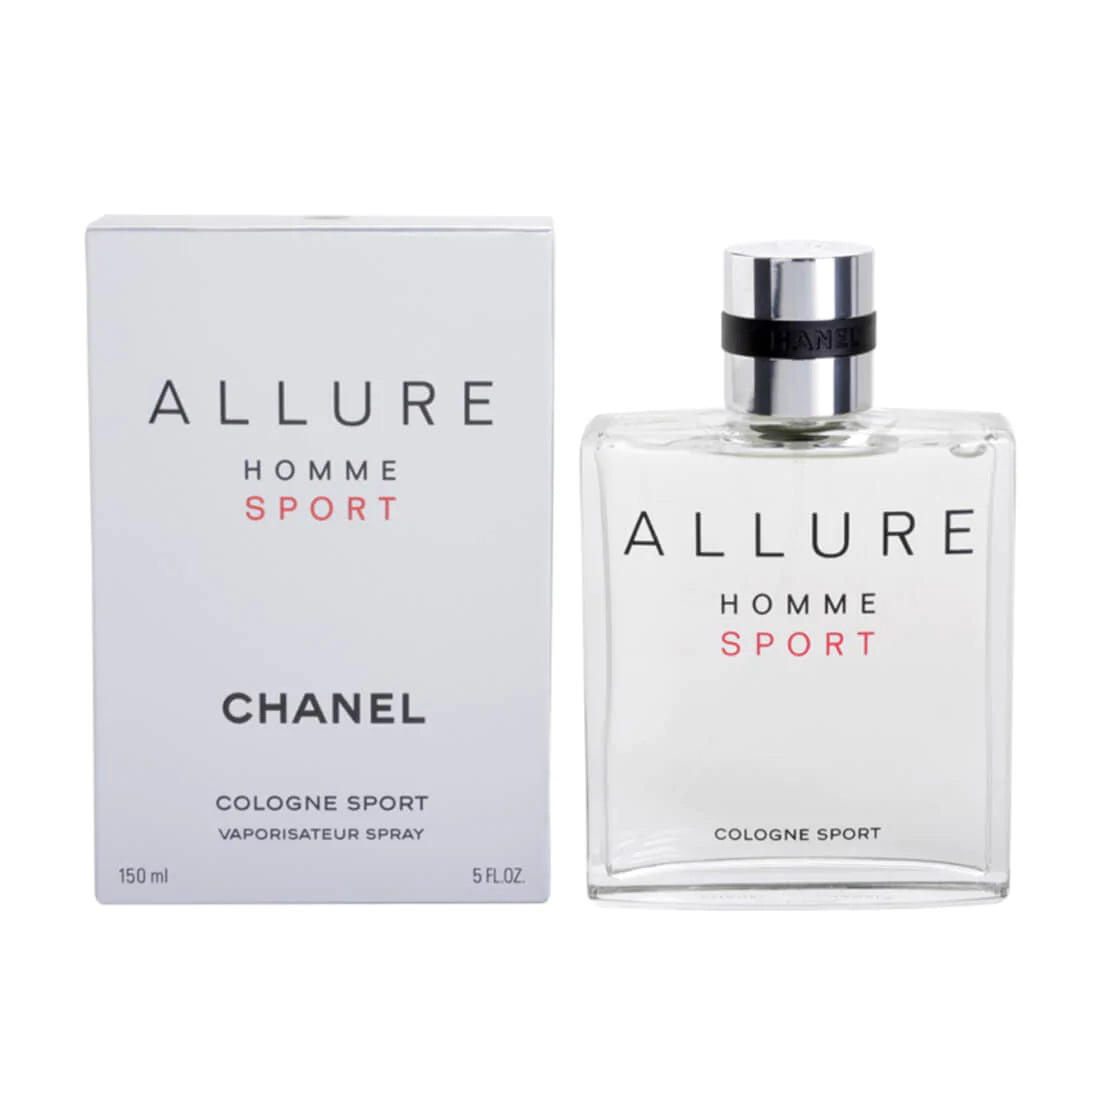 ALLURE HOMME SPORT COLOGNE SPRAY - ALLURE HOMME SPORT - PERFUMES